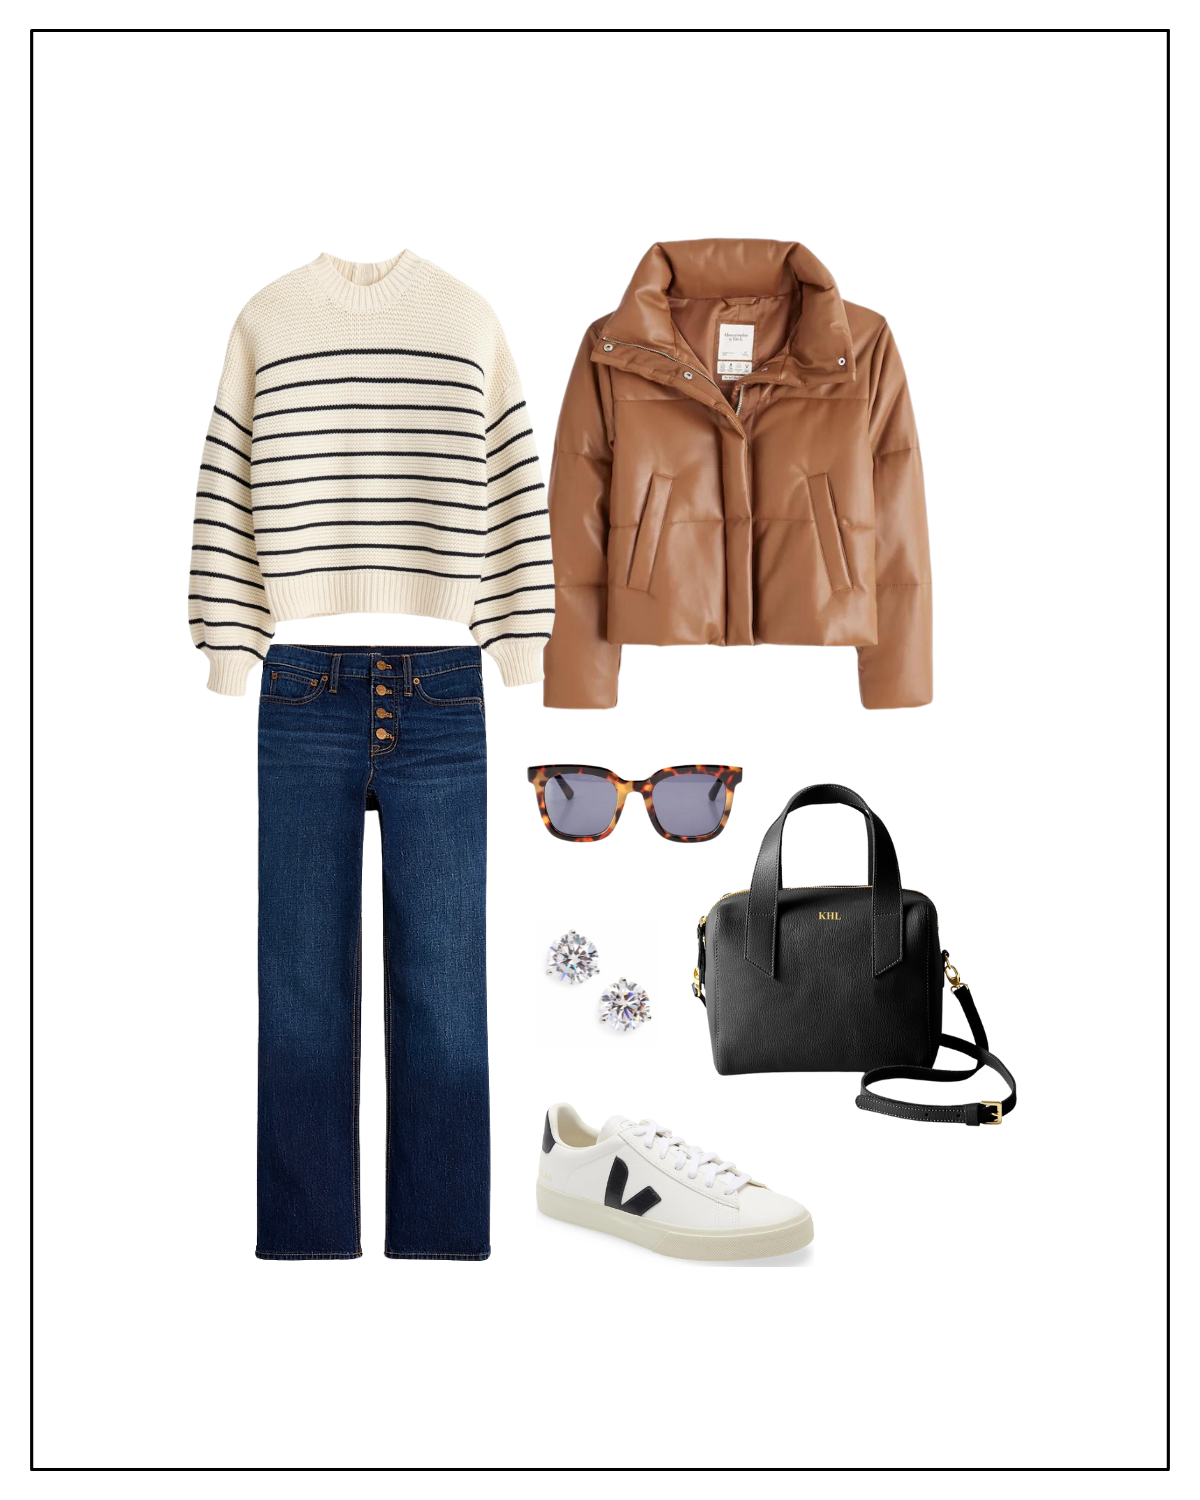 How to Style a Striped Sweater with puffer jacket